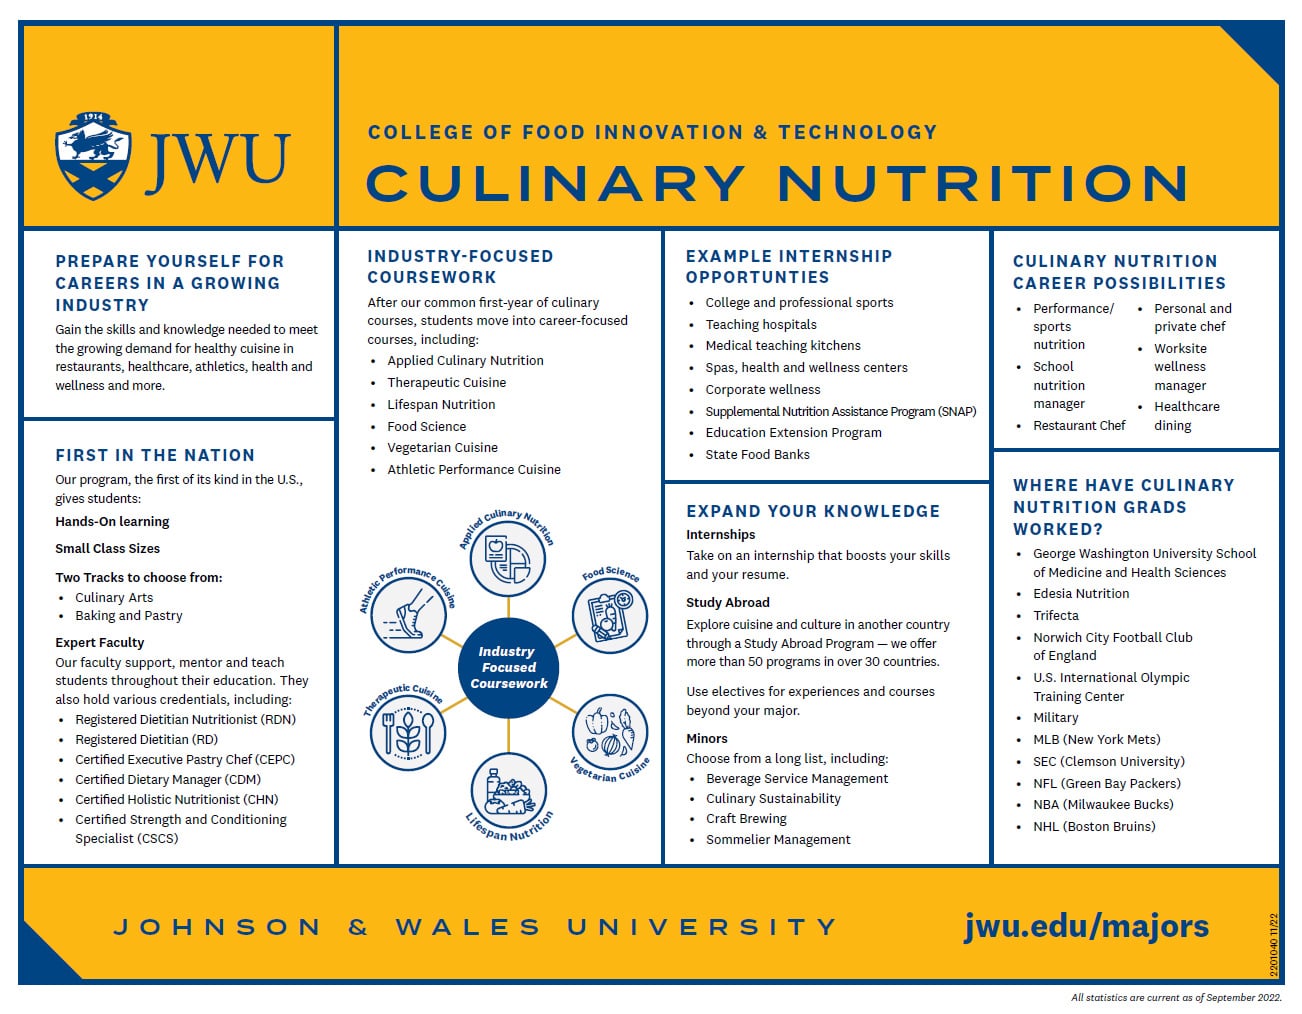 JWU Culinary Nutrition Program Quick Facts